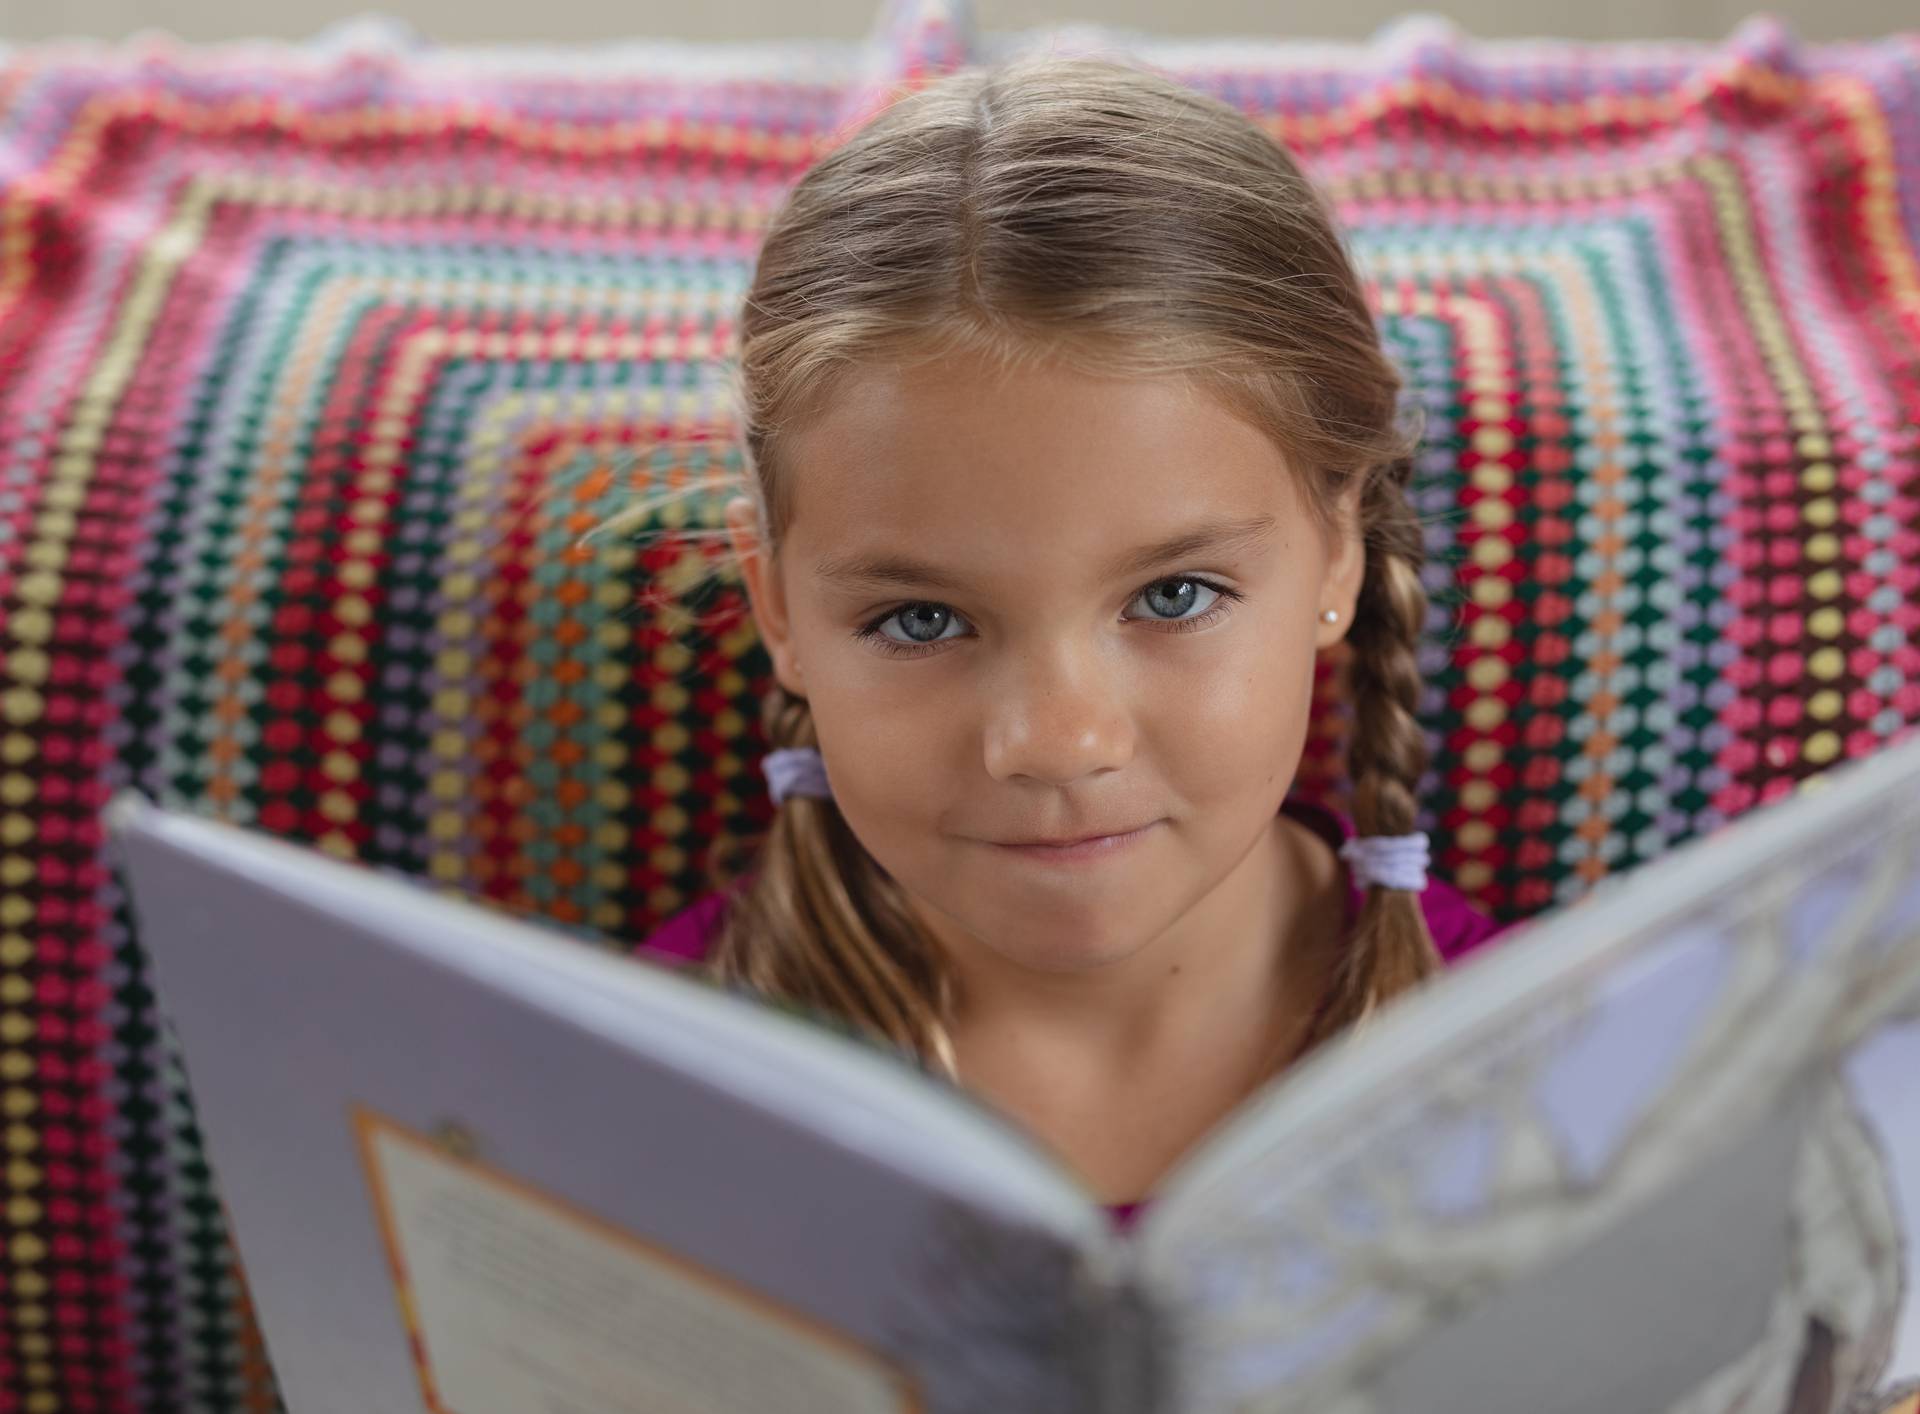 Font view of cute Caucasian girl looking at camera while reading a book on sofa in a comfortable home